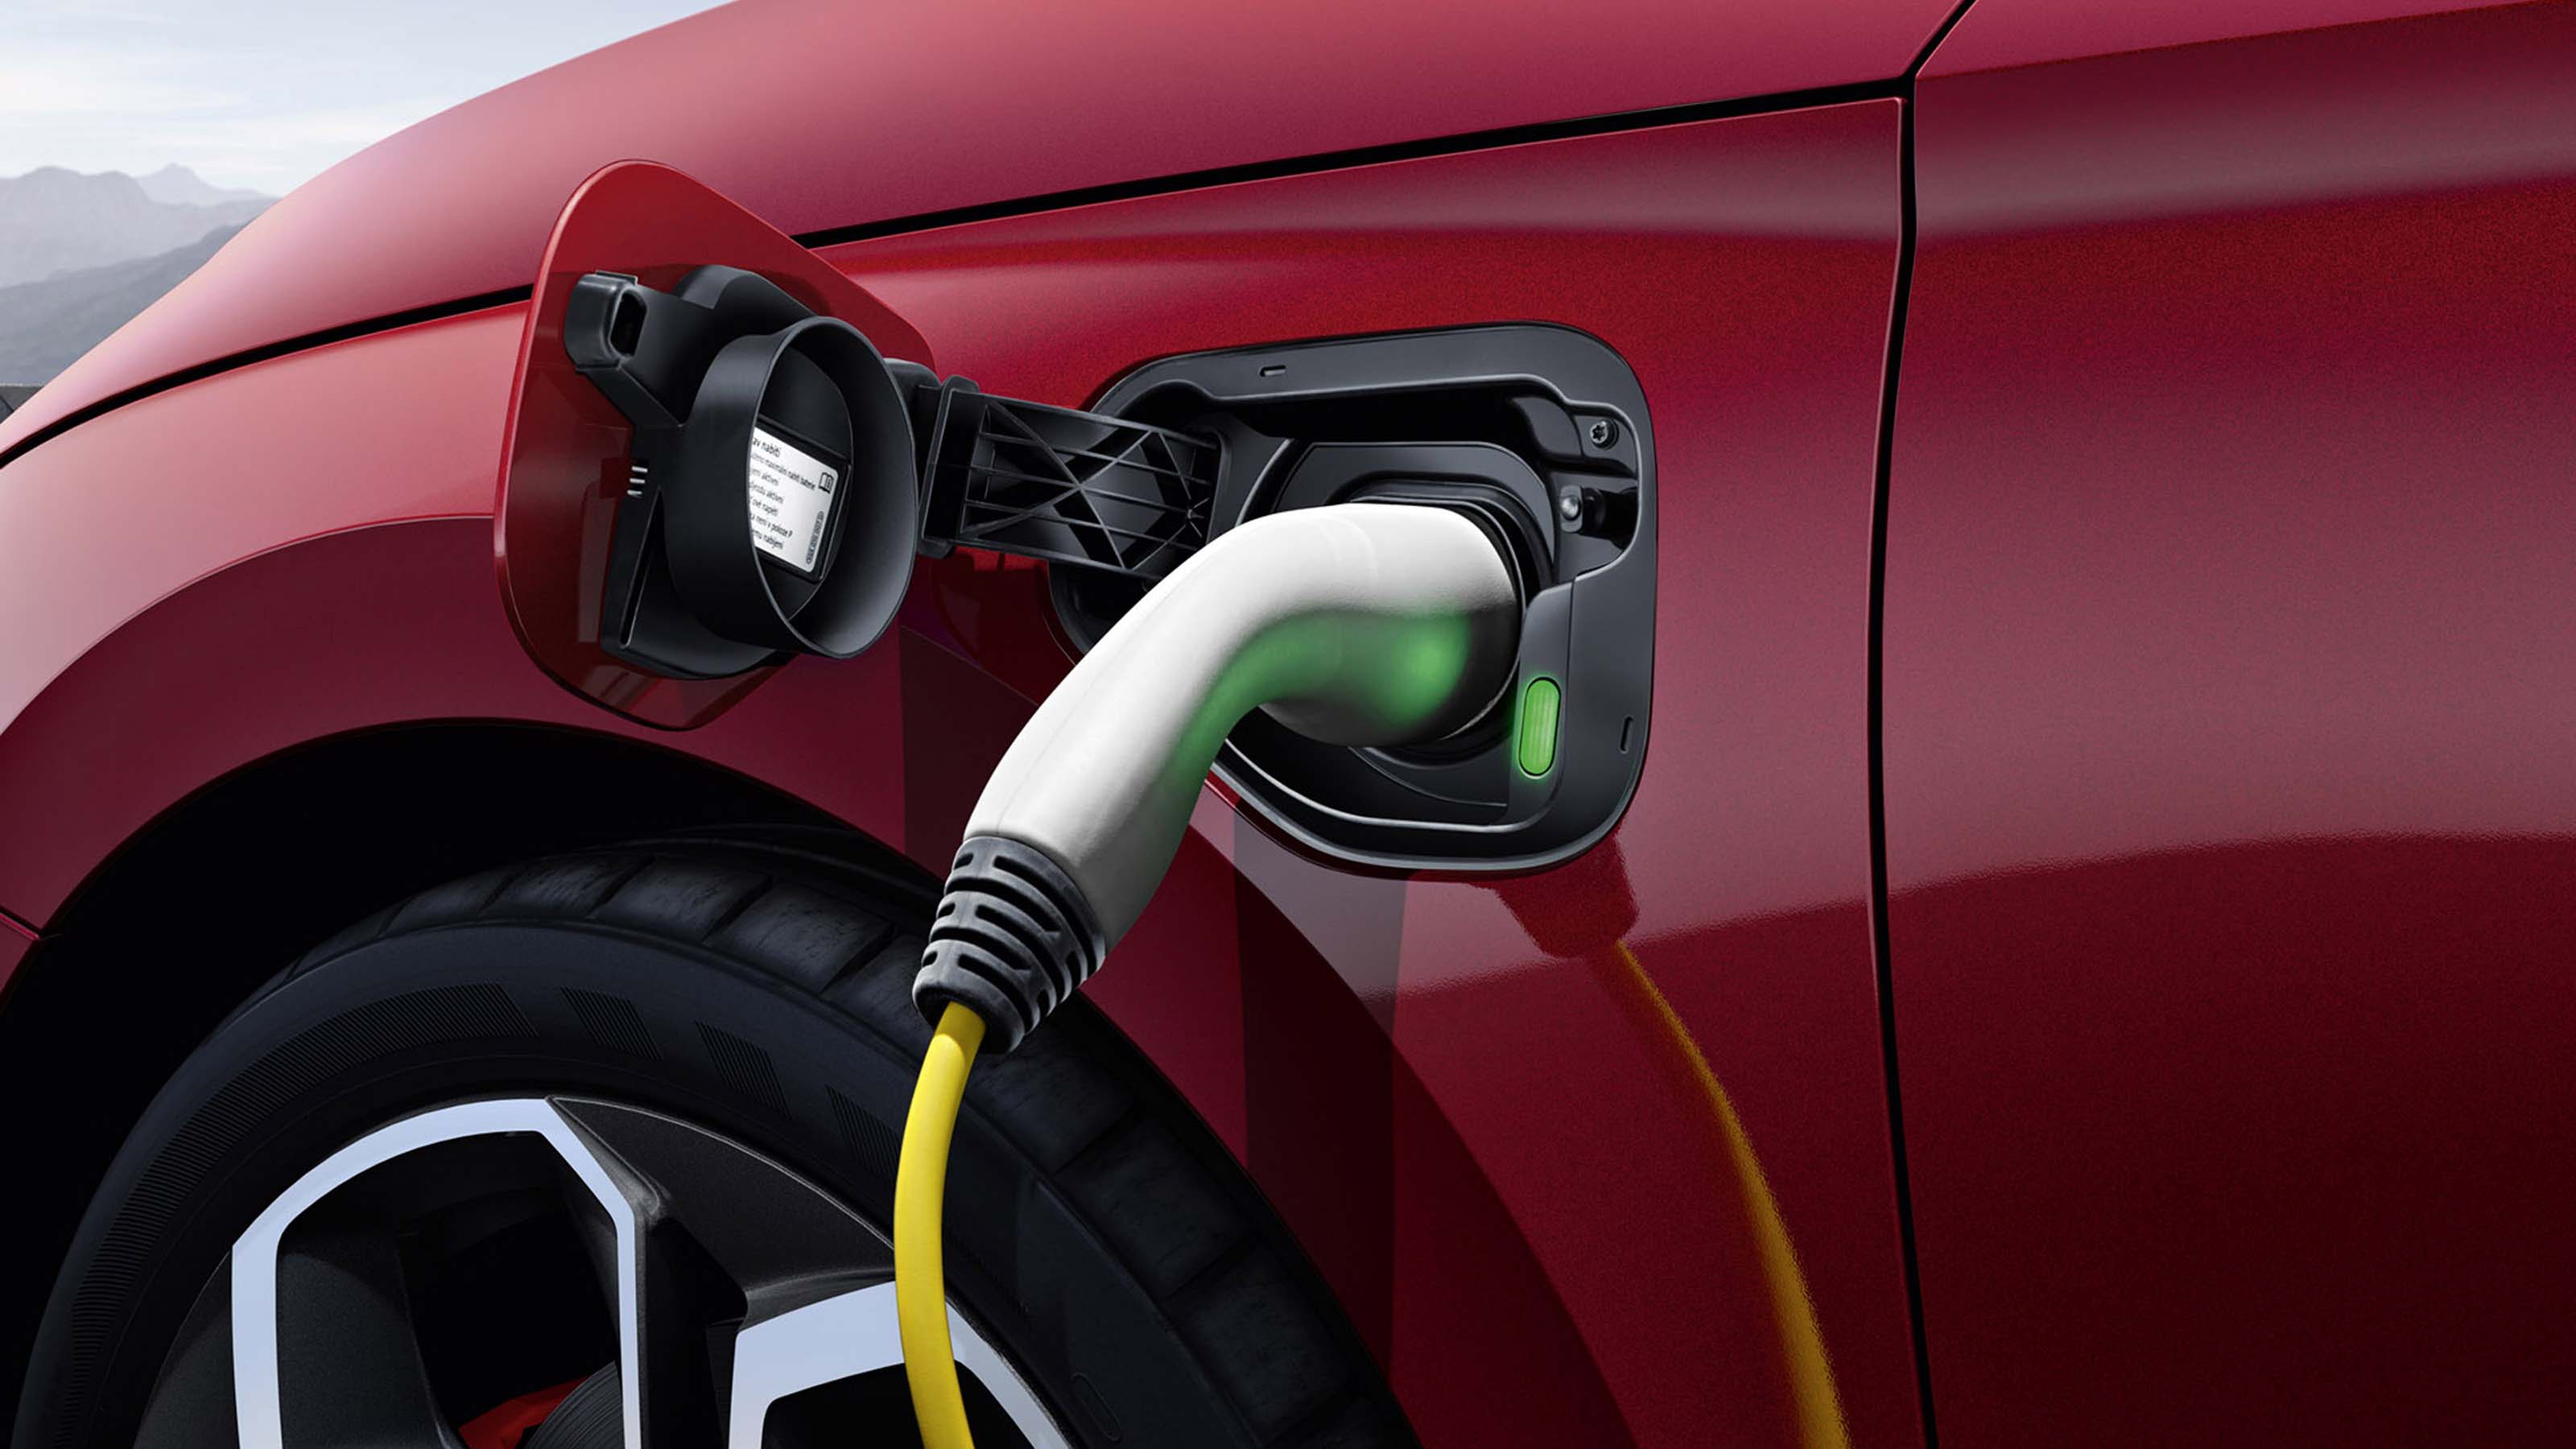 Electric vehicles make up just one per cent of Department for Transport